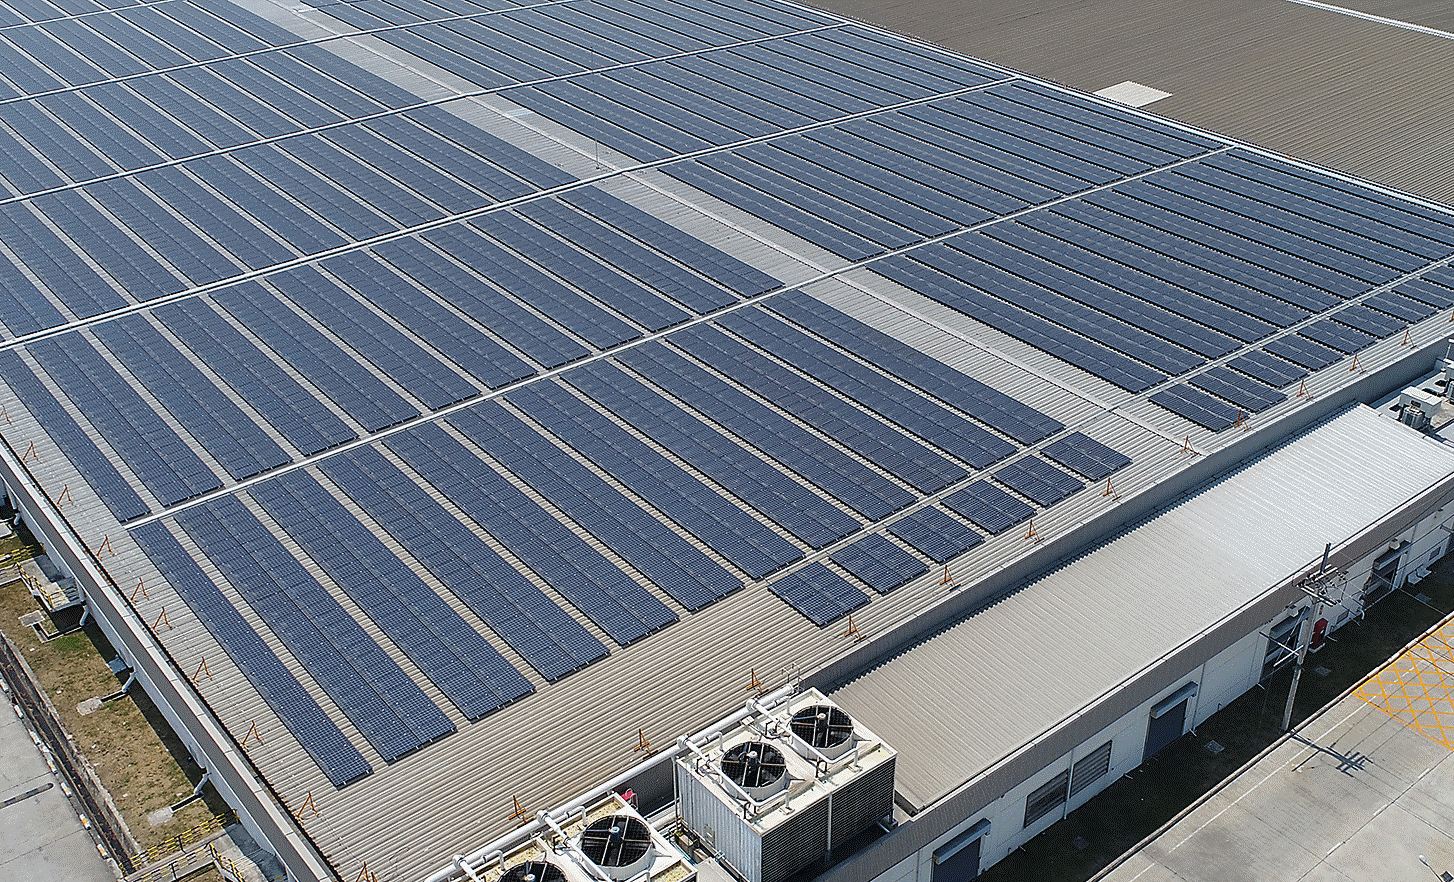 Photograph of factory roof of Sony EMCS (Malaysia) covered with solar panels